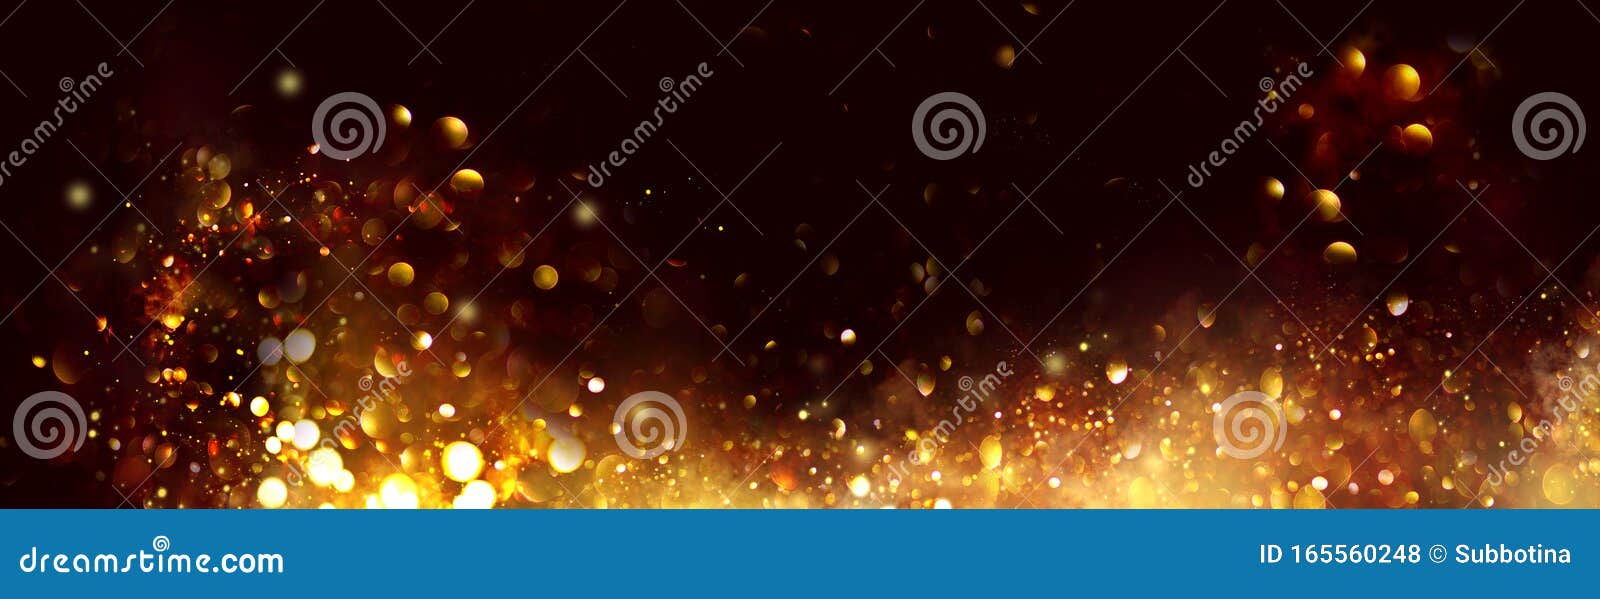 golden christmas and new year glittering stars swirl on black bokeh background, backdrop with sparkling golden stars